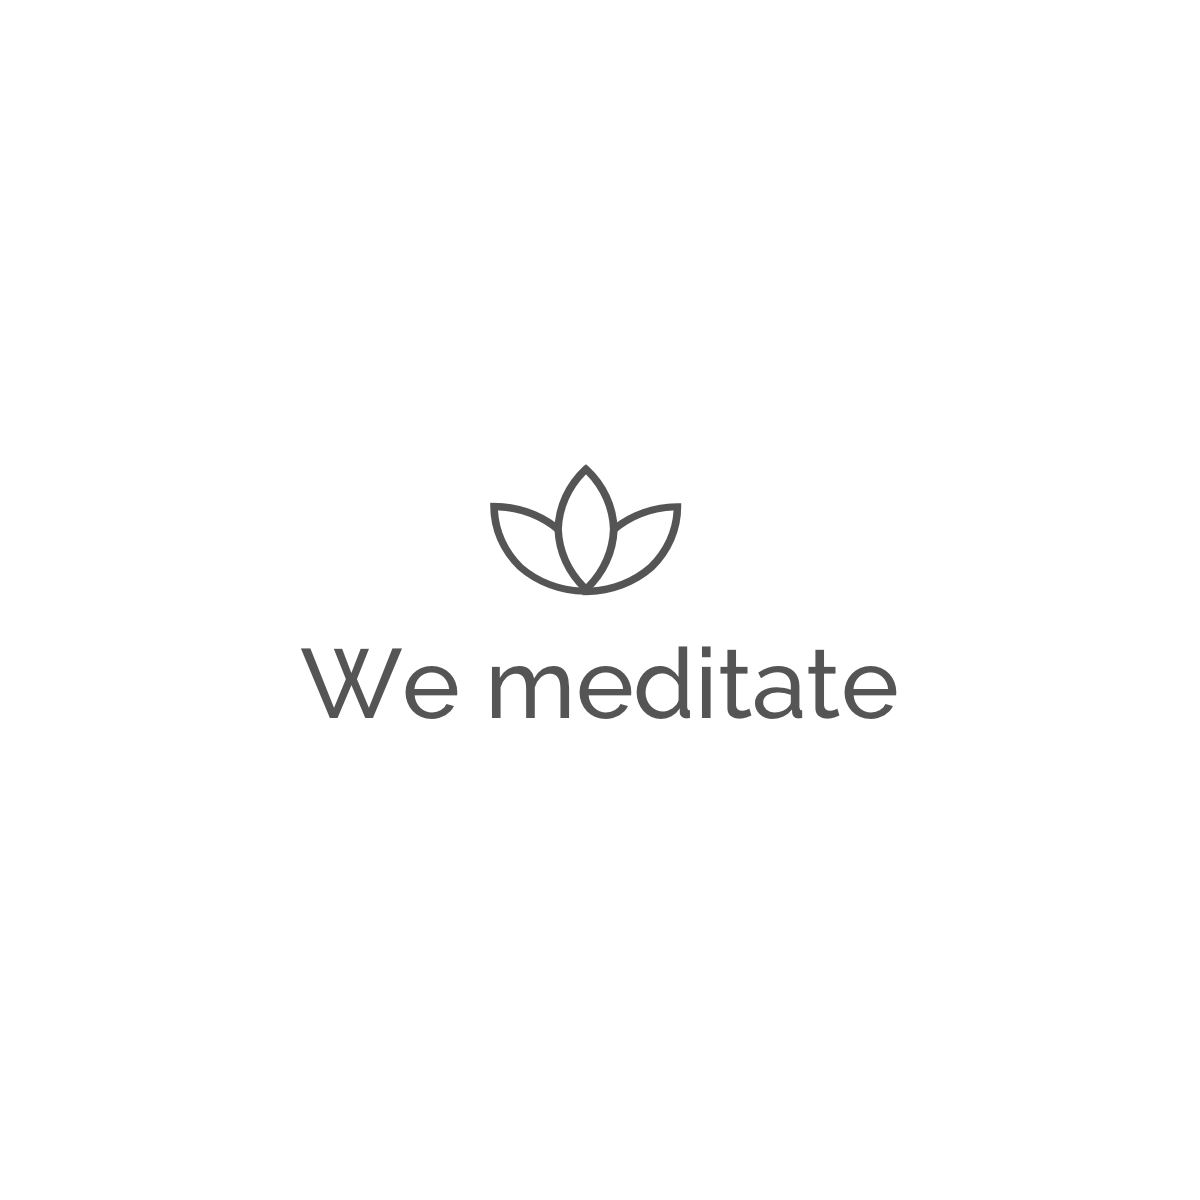 Guided Meditation For a Better Life - Always Free | We Meditate